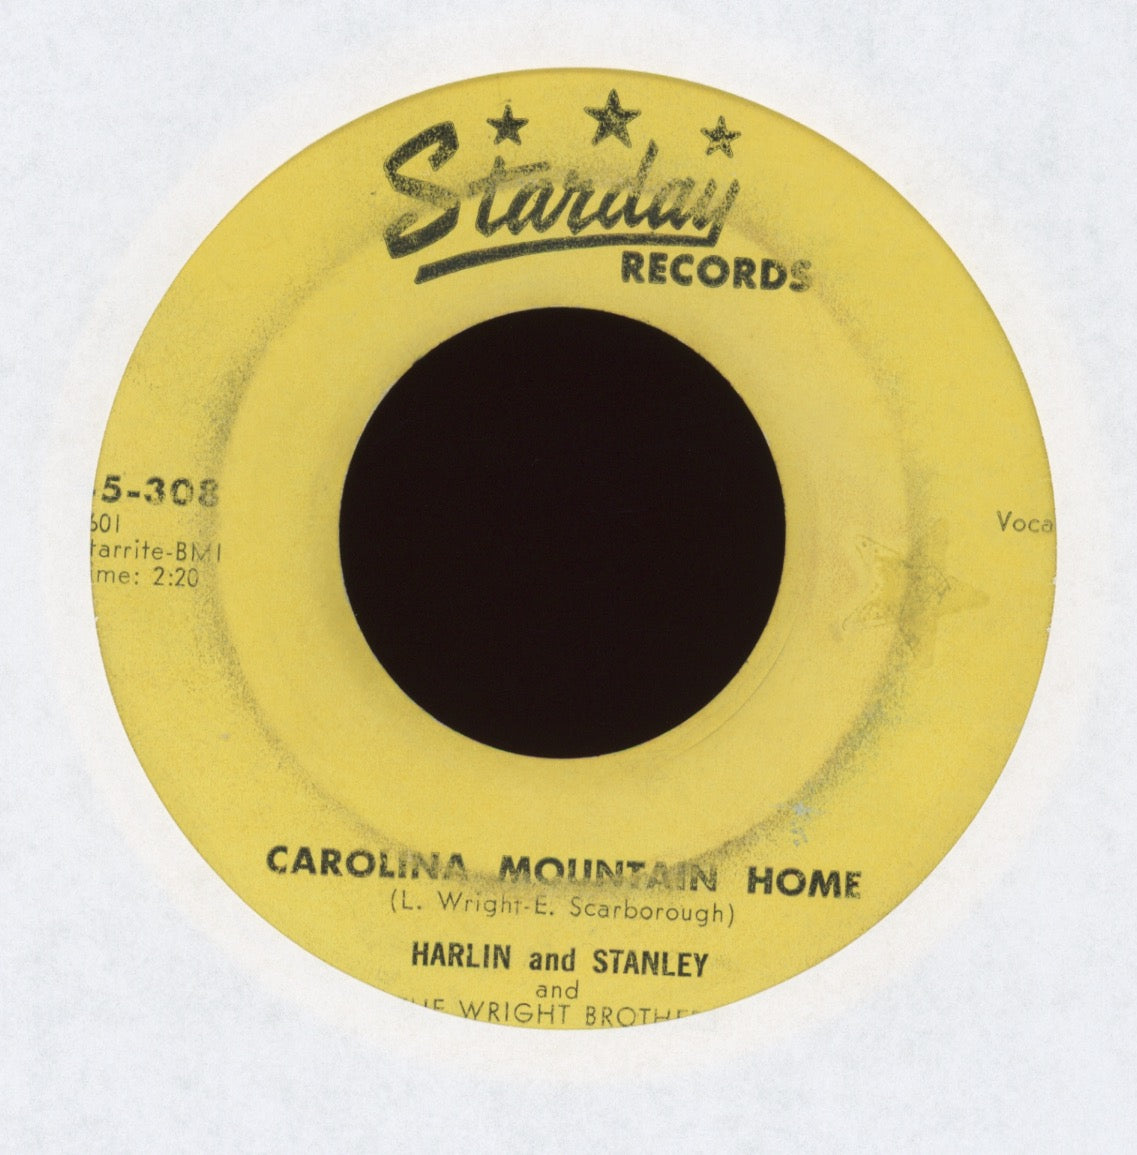 Harlin And Stanley - Carolina Mountain Home on Starday